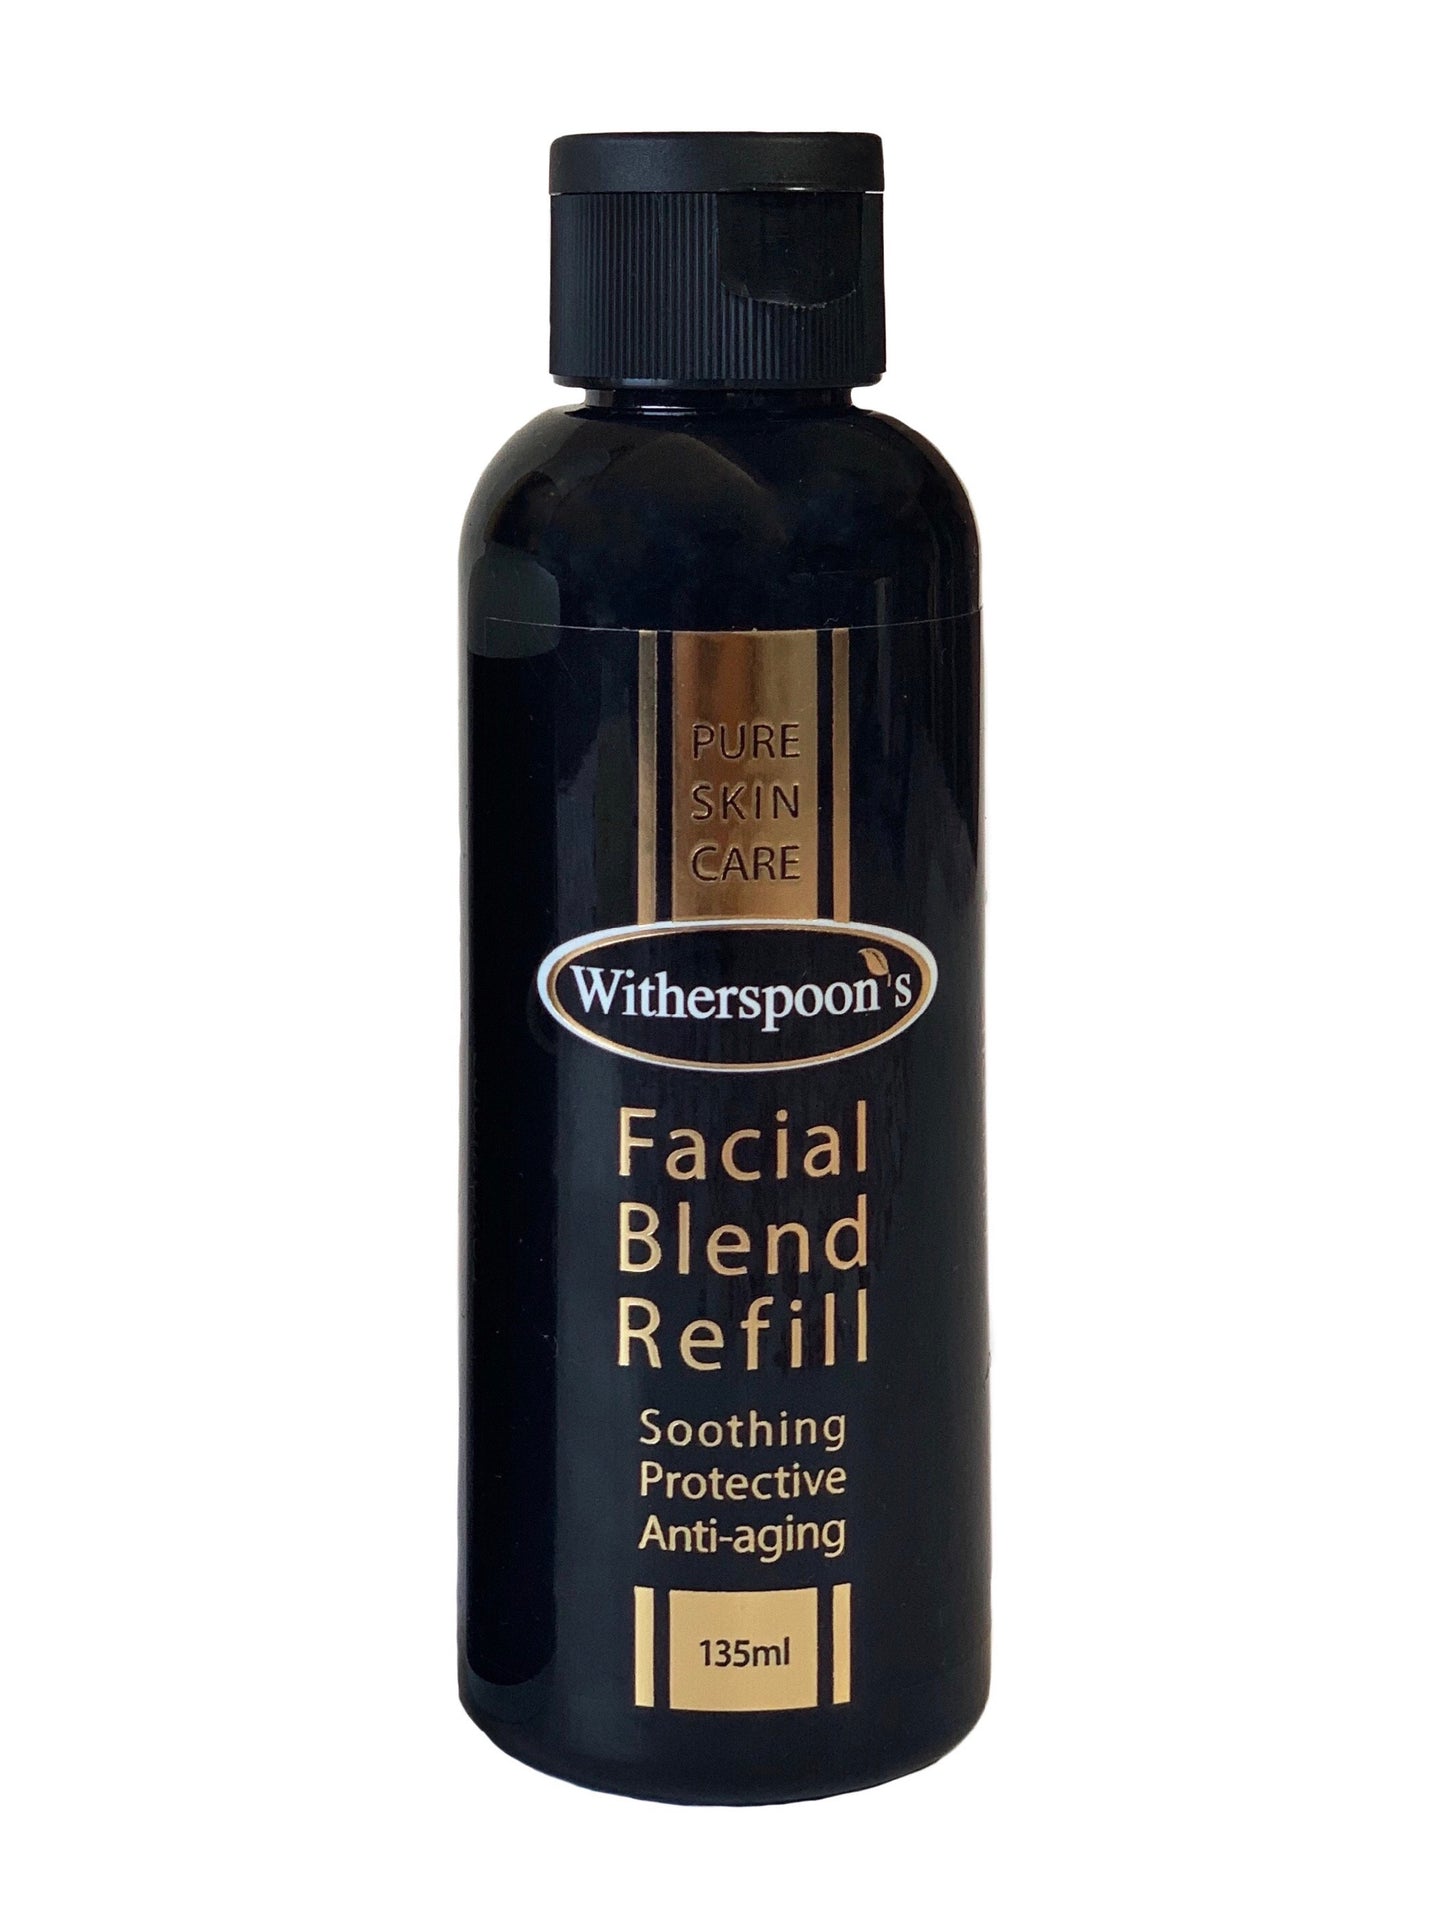 Witherspoon's Facial Blend. Australian made Anti-aging serum. Dry skin moisturiser for sensitive skin. 135ml with flip top lid. Concentrated formula, use with damp hands. For all skin types